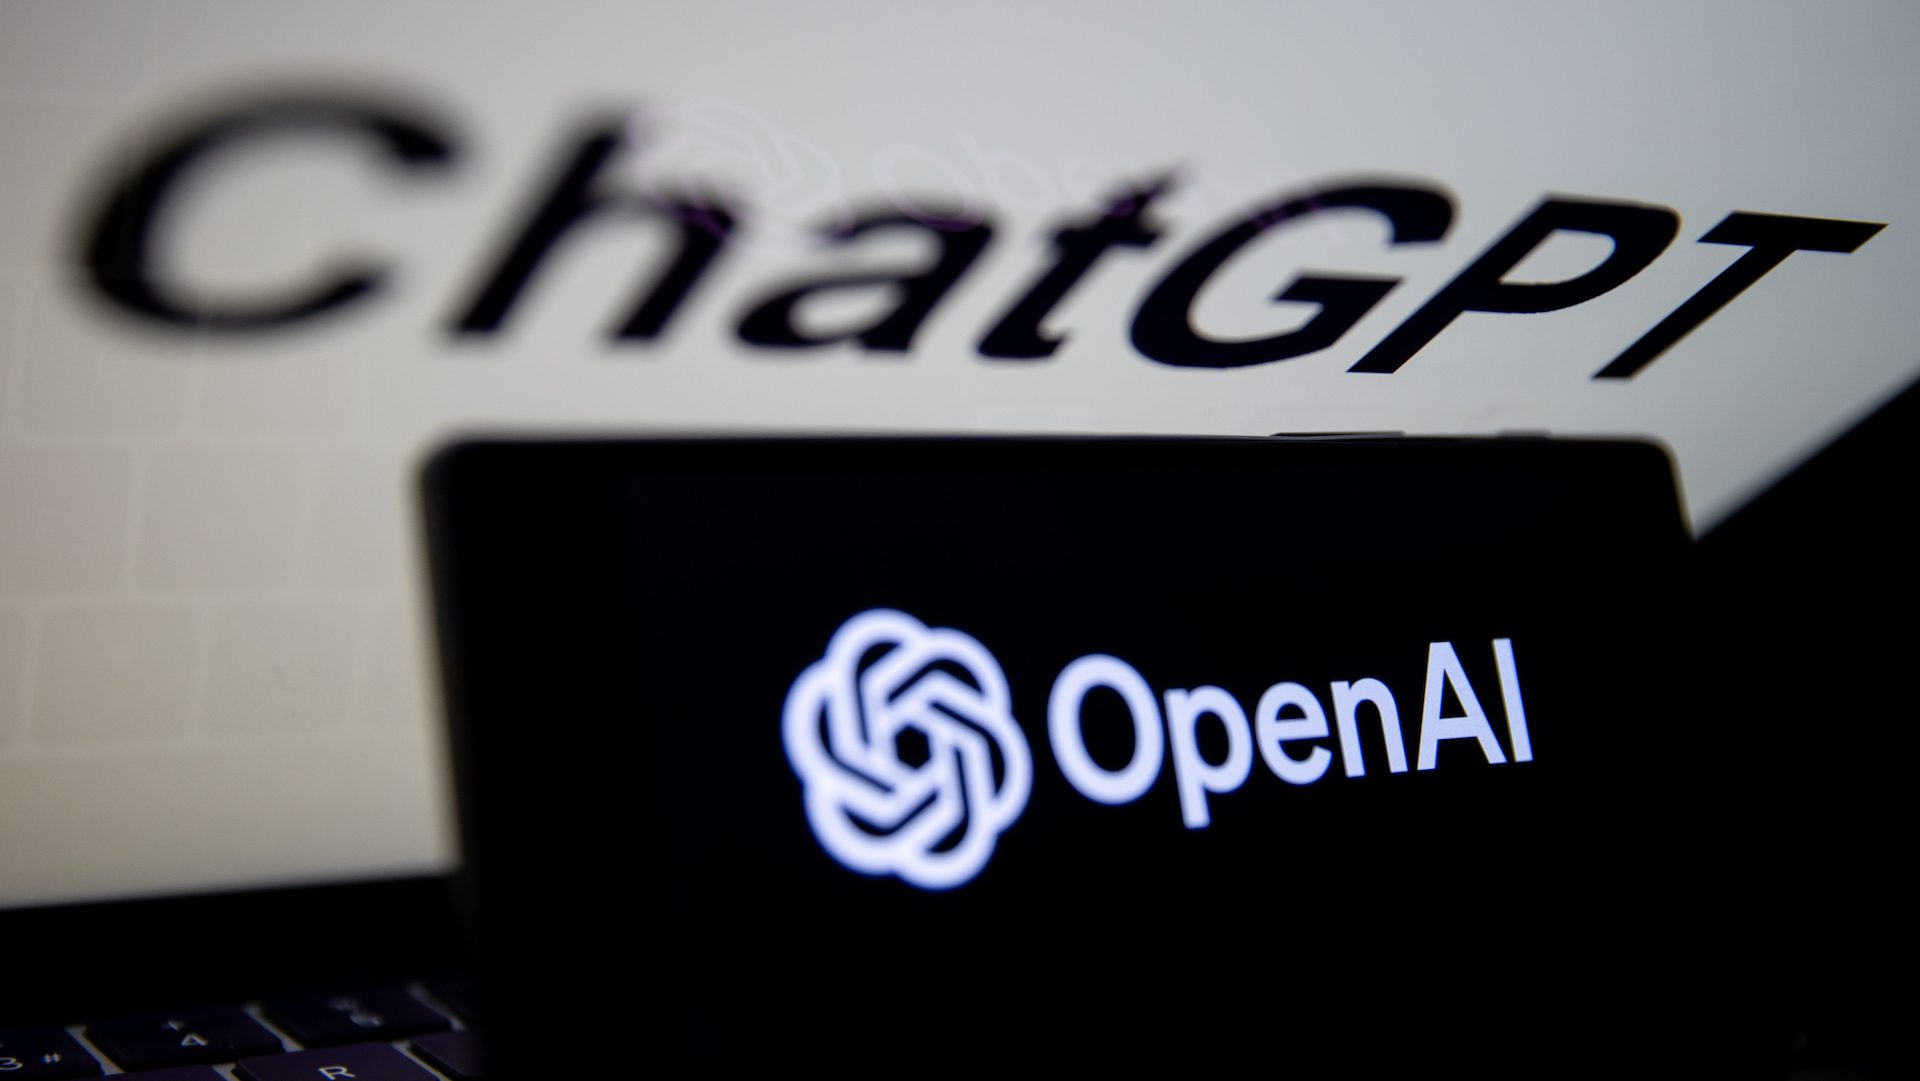 OpenAI logo displayed on a mobile phone screen in front of a computer screen with the ChatGPT logo